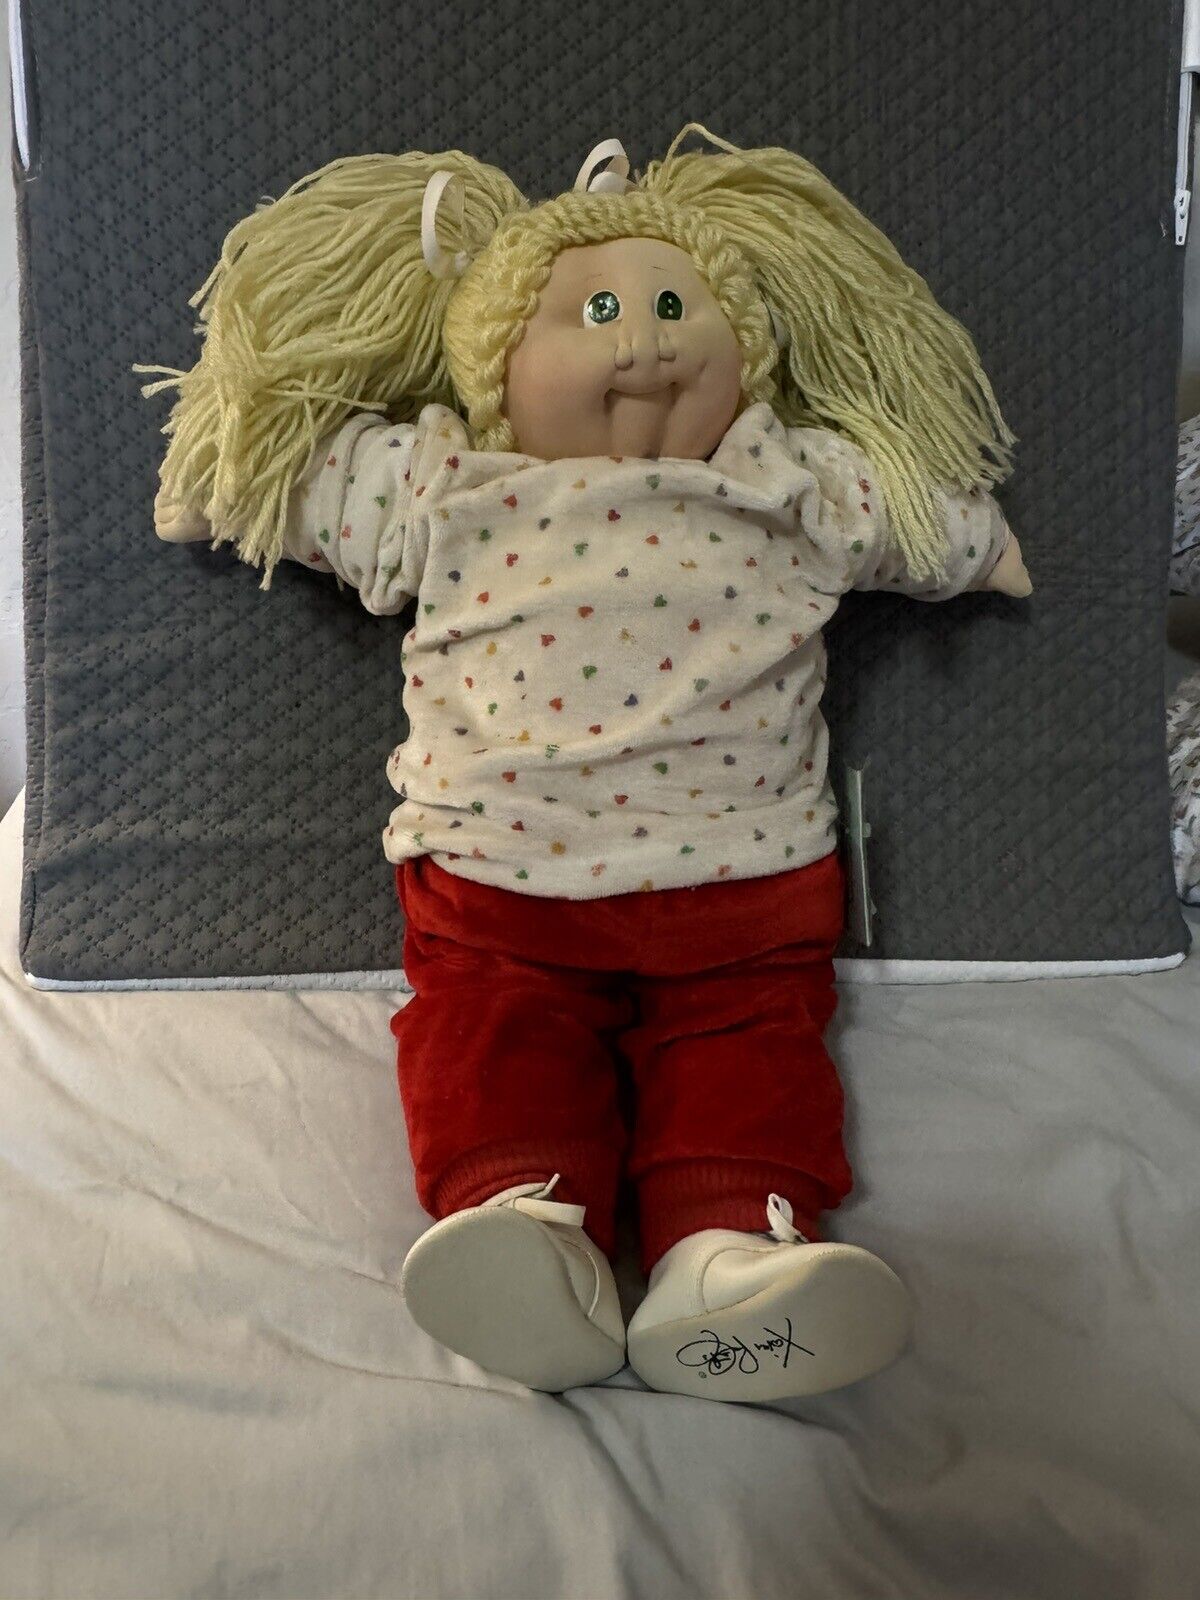 The Little People Soft Sculpture Cabbage Patch 1984 with papers and tag.